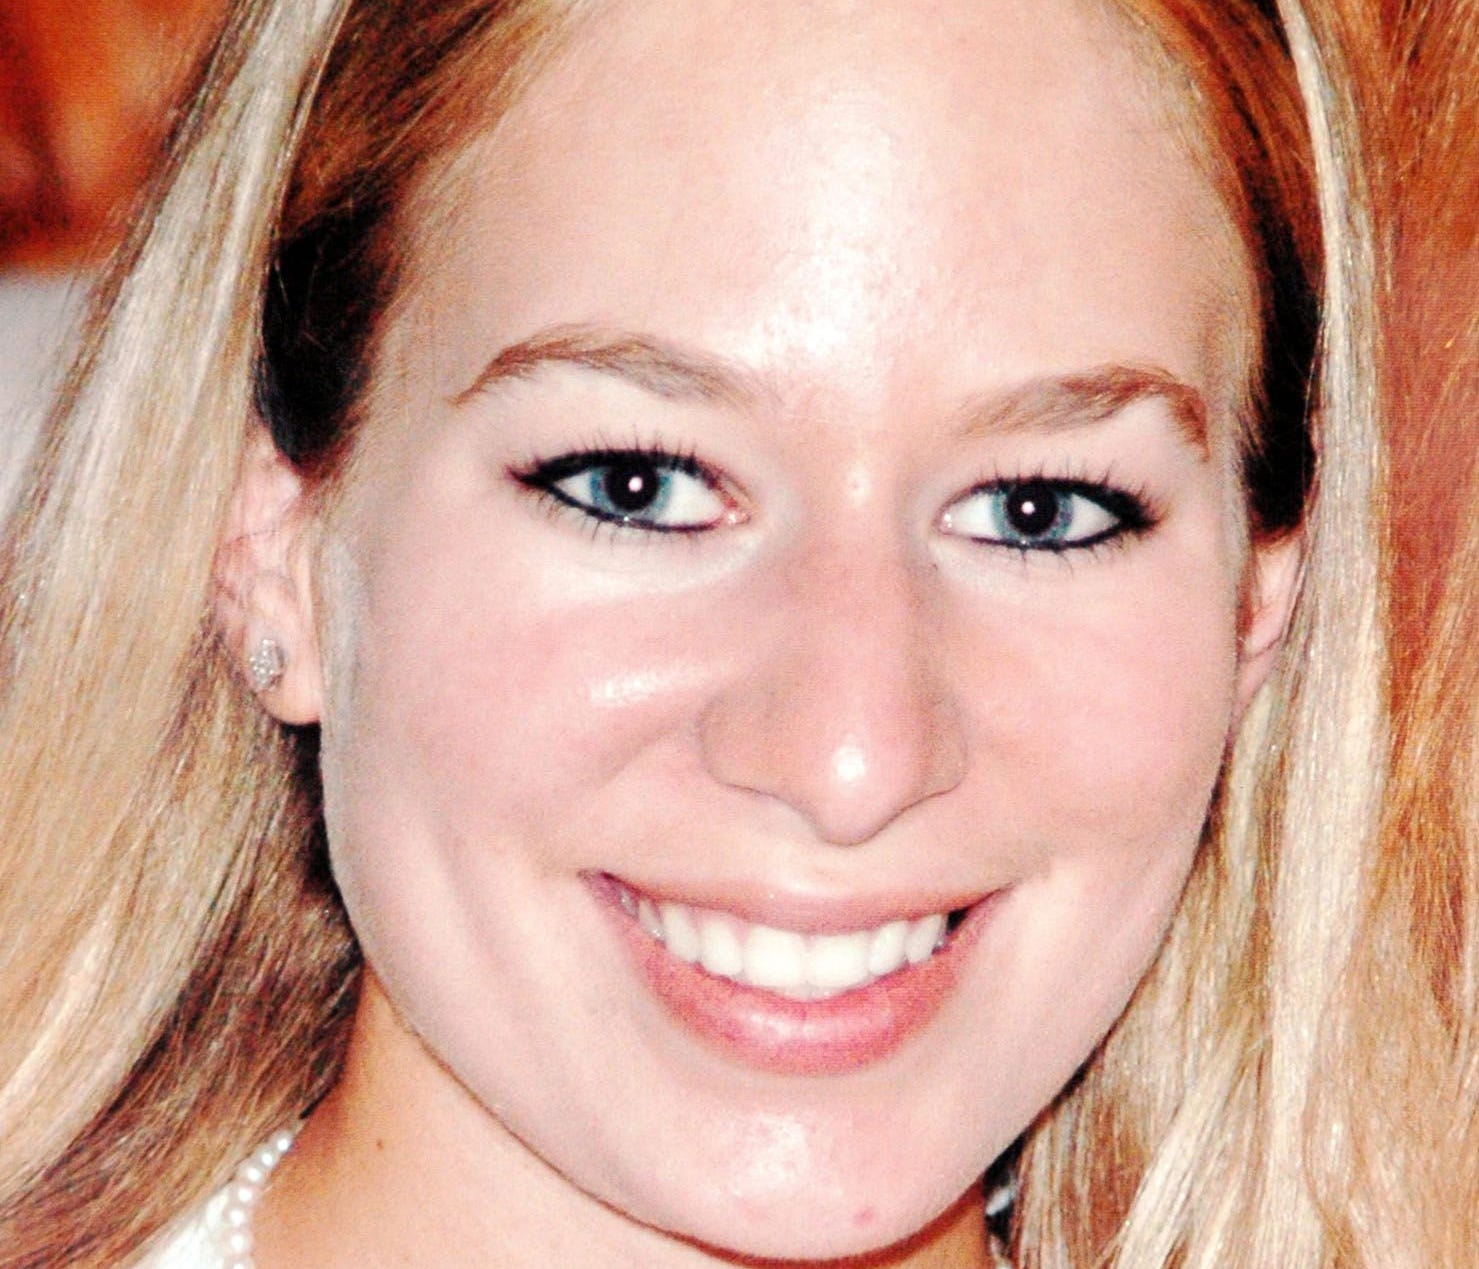 This family photo shows Natalee Holloway of Mountain Brook, Ala. The teenager disappeared in 2005 during a graduation trip to Aruba.